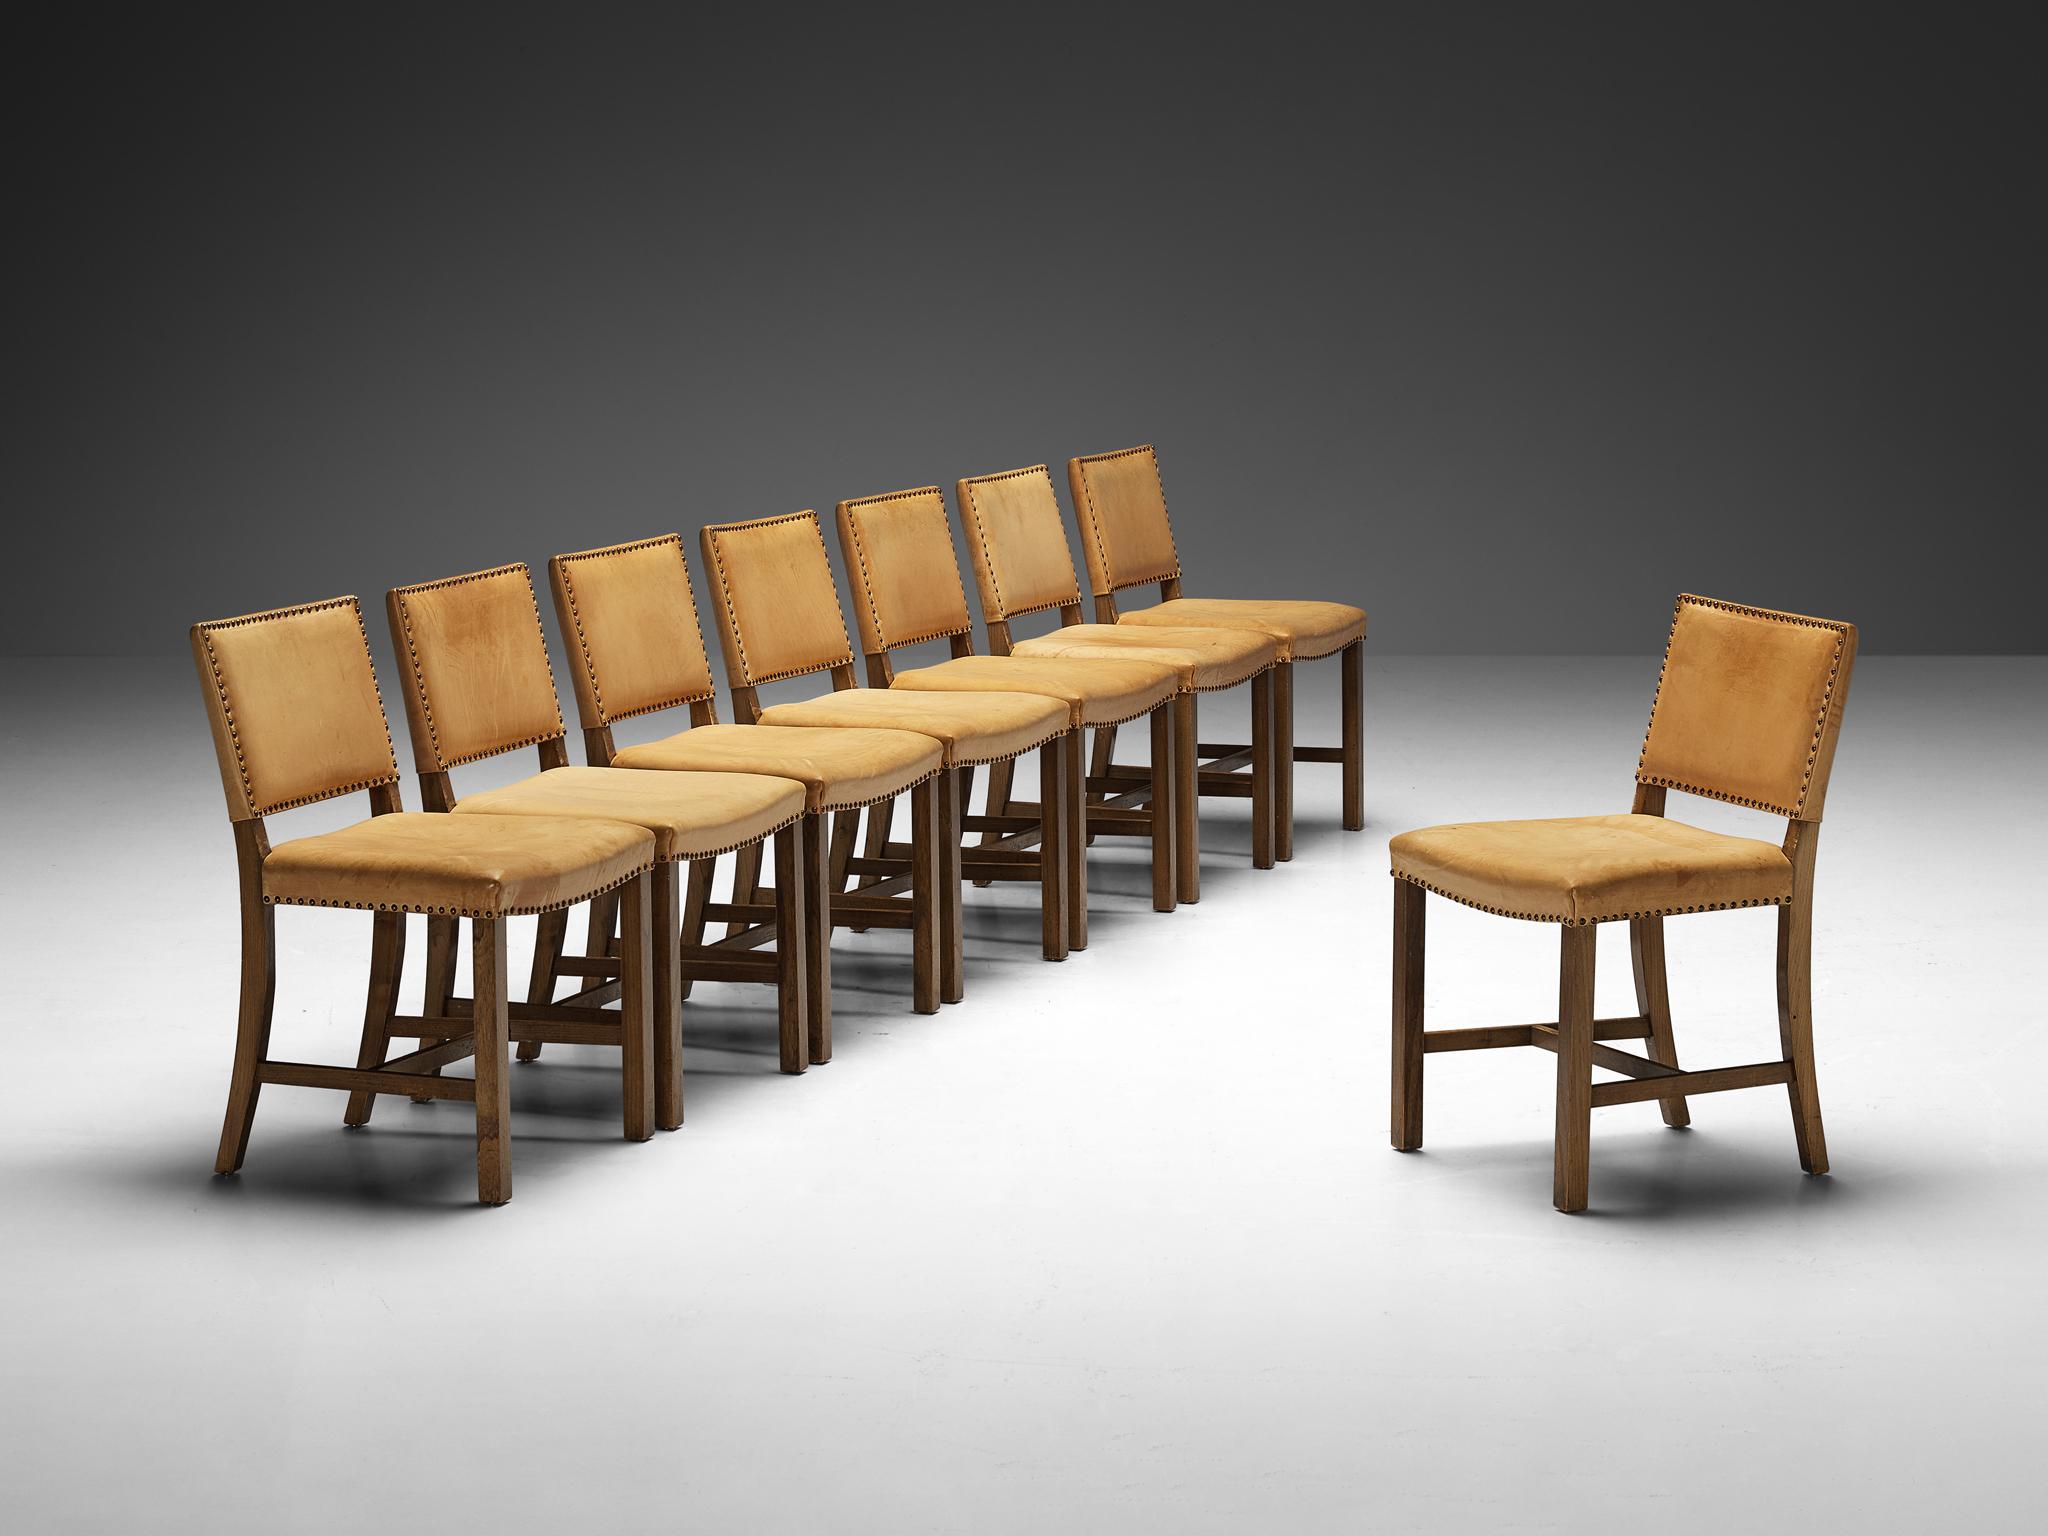 Set of eight dining chairs, elm, leather, metal, Denmark, 1950s

Imbued with timeless elegance and craftsmanship, this set of Danish dining chairs shows strong similarities to the distinguished style of Kaare Klint. Crafted with meticulous attention